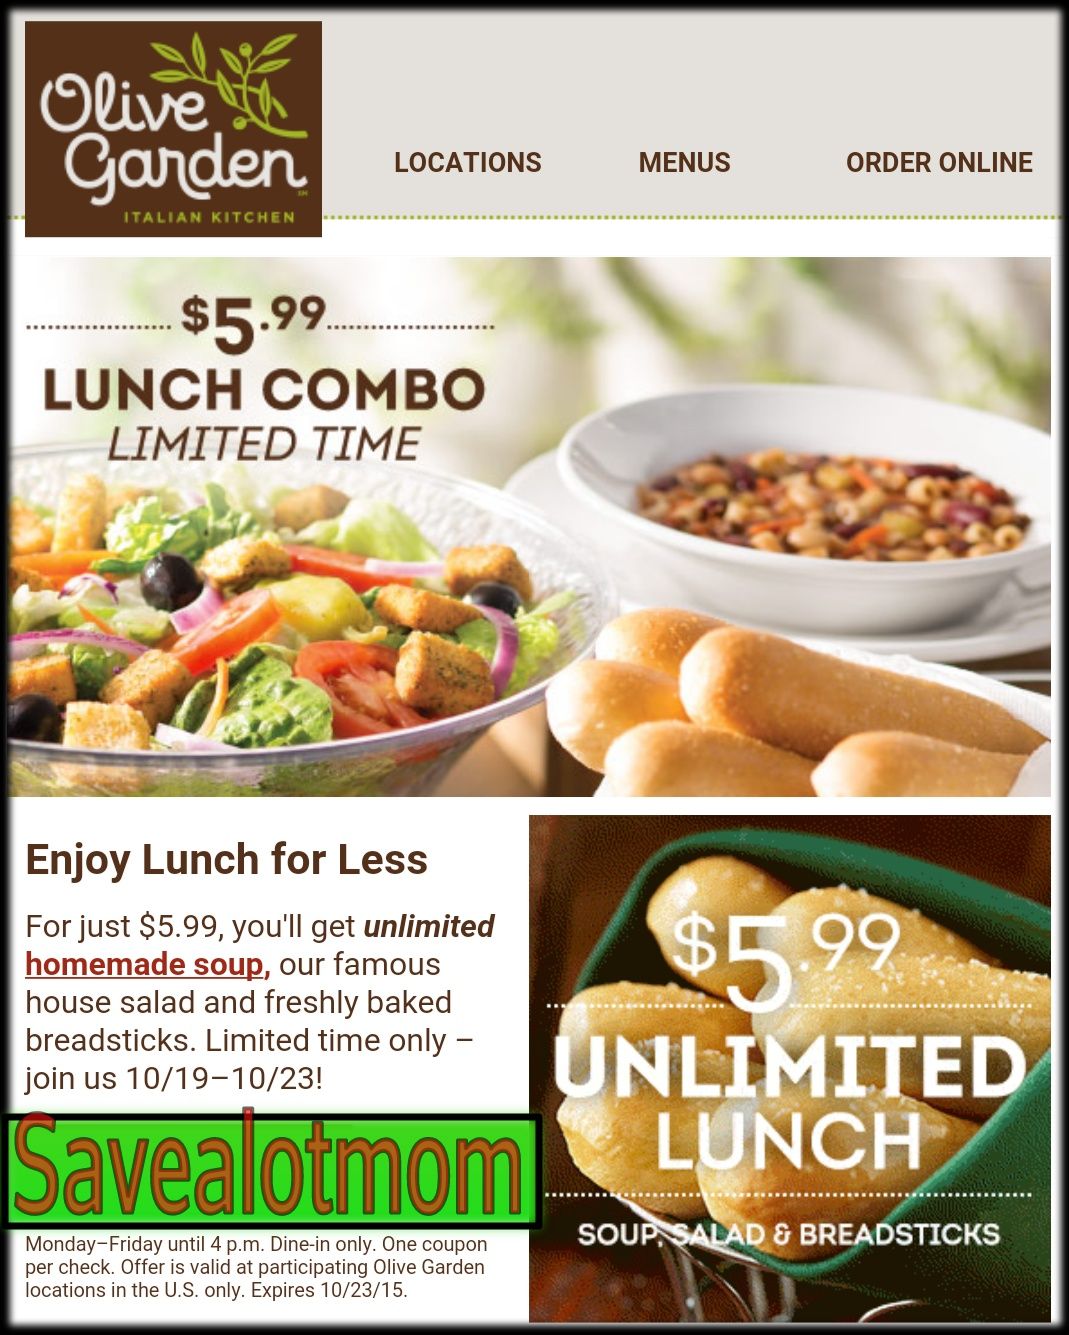 Is Salad Unlimited At Olive Garden